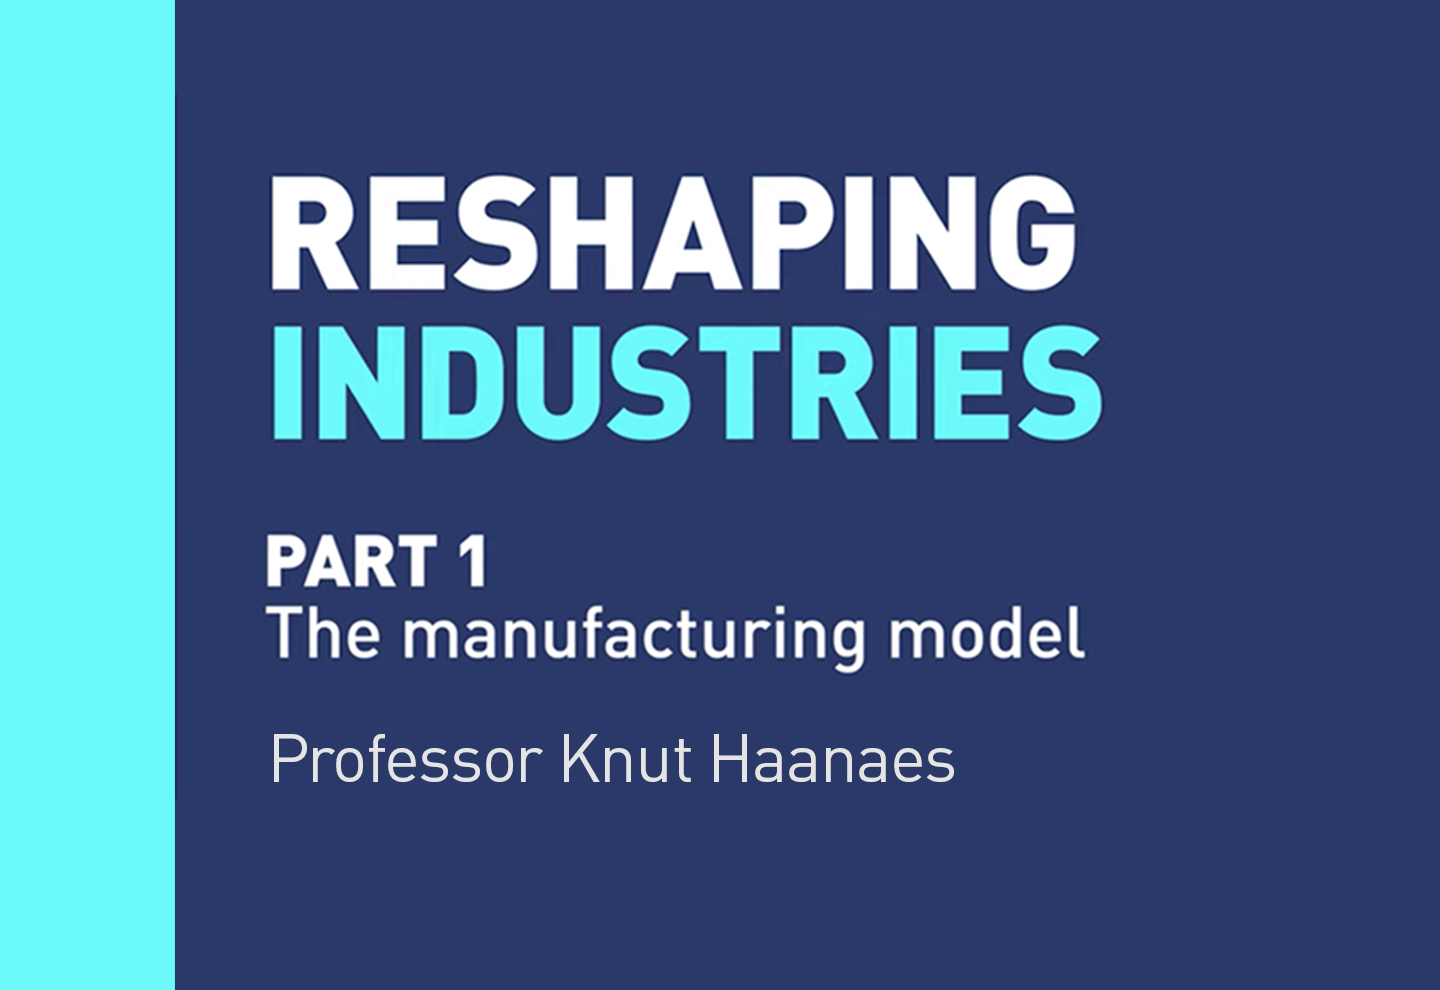 Reshaping Industries: Embracing the New Normal